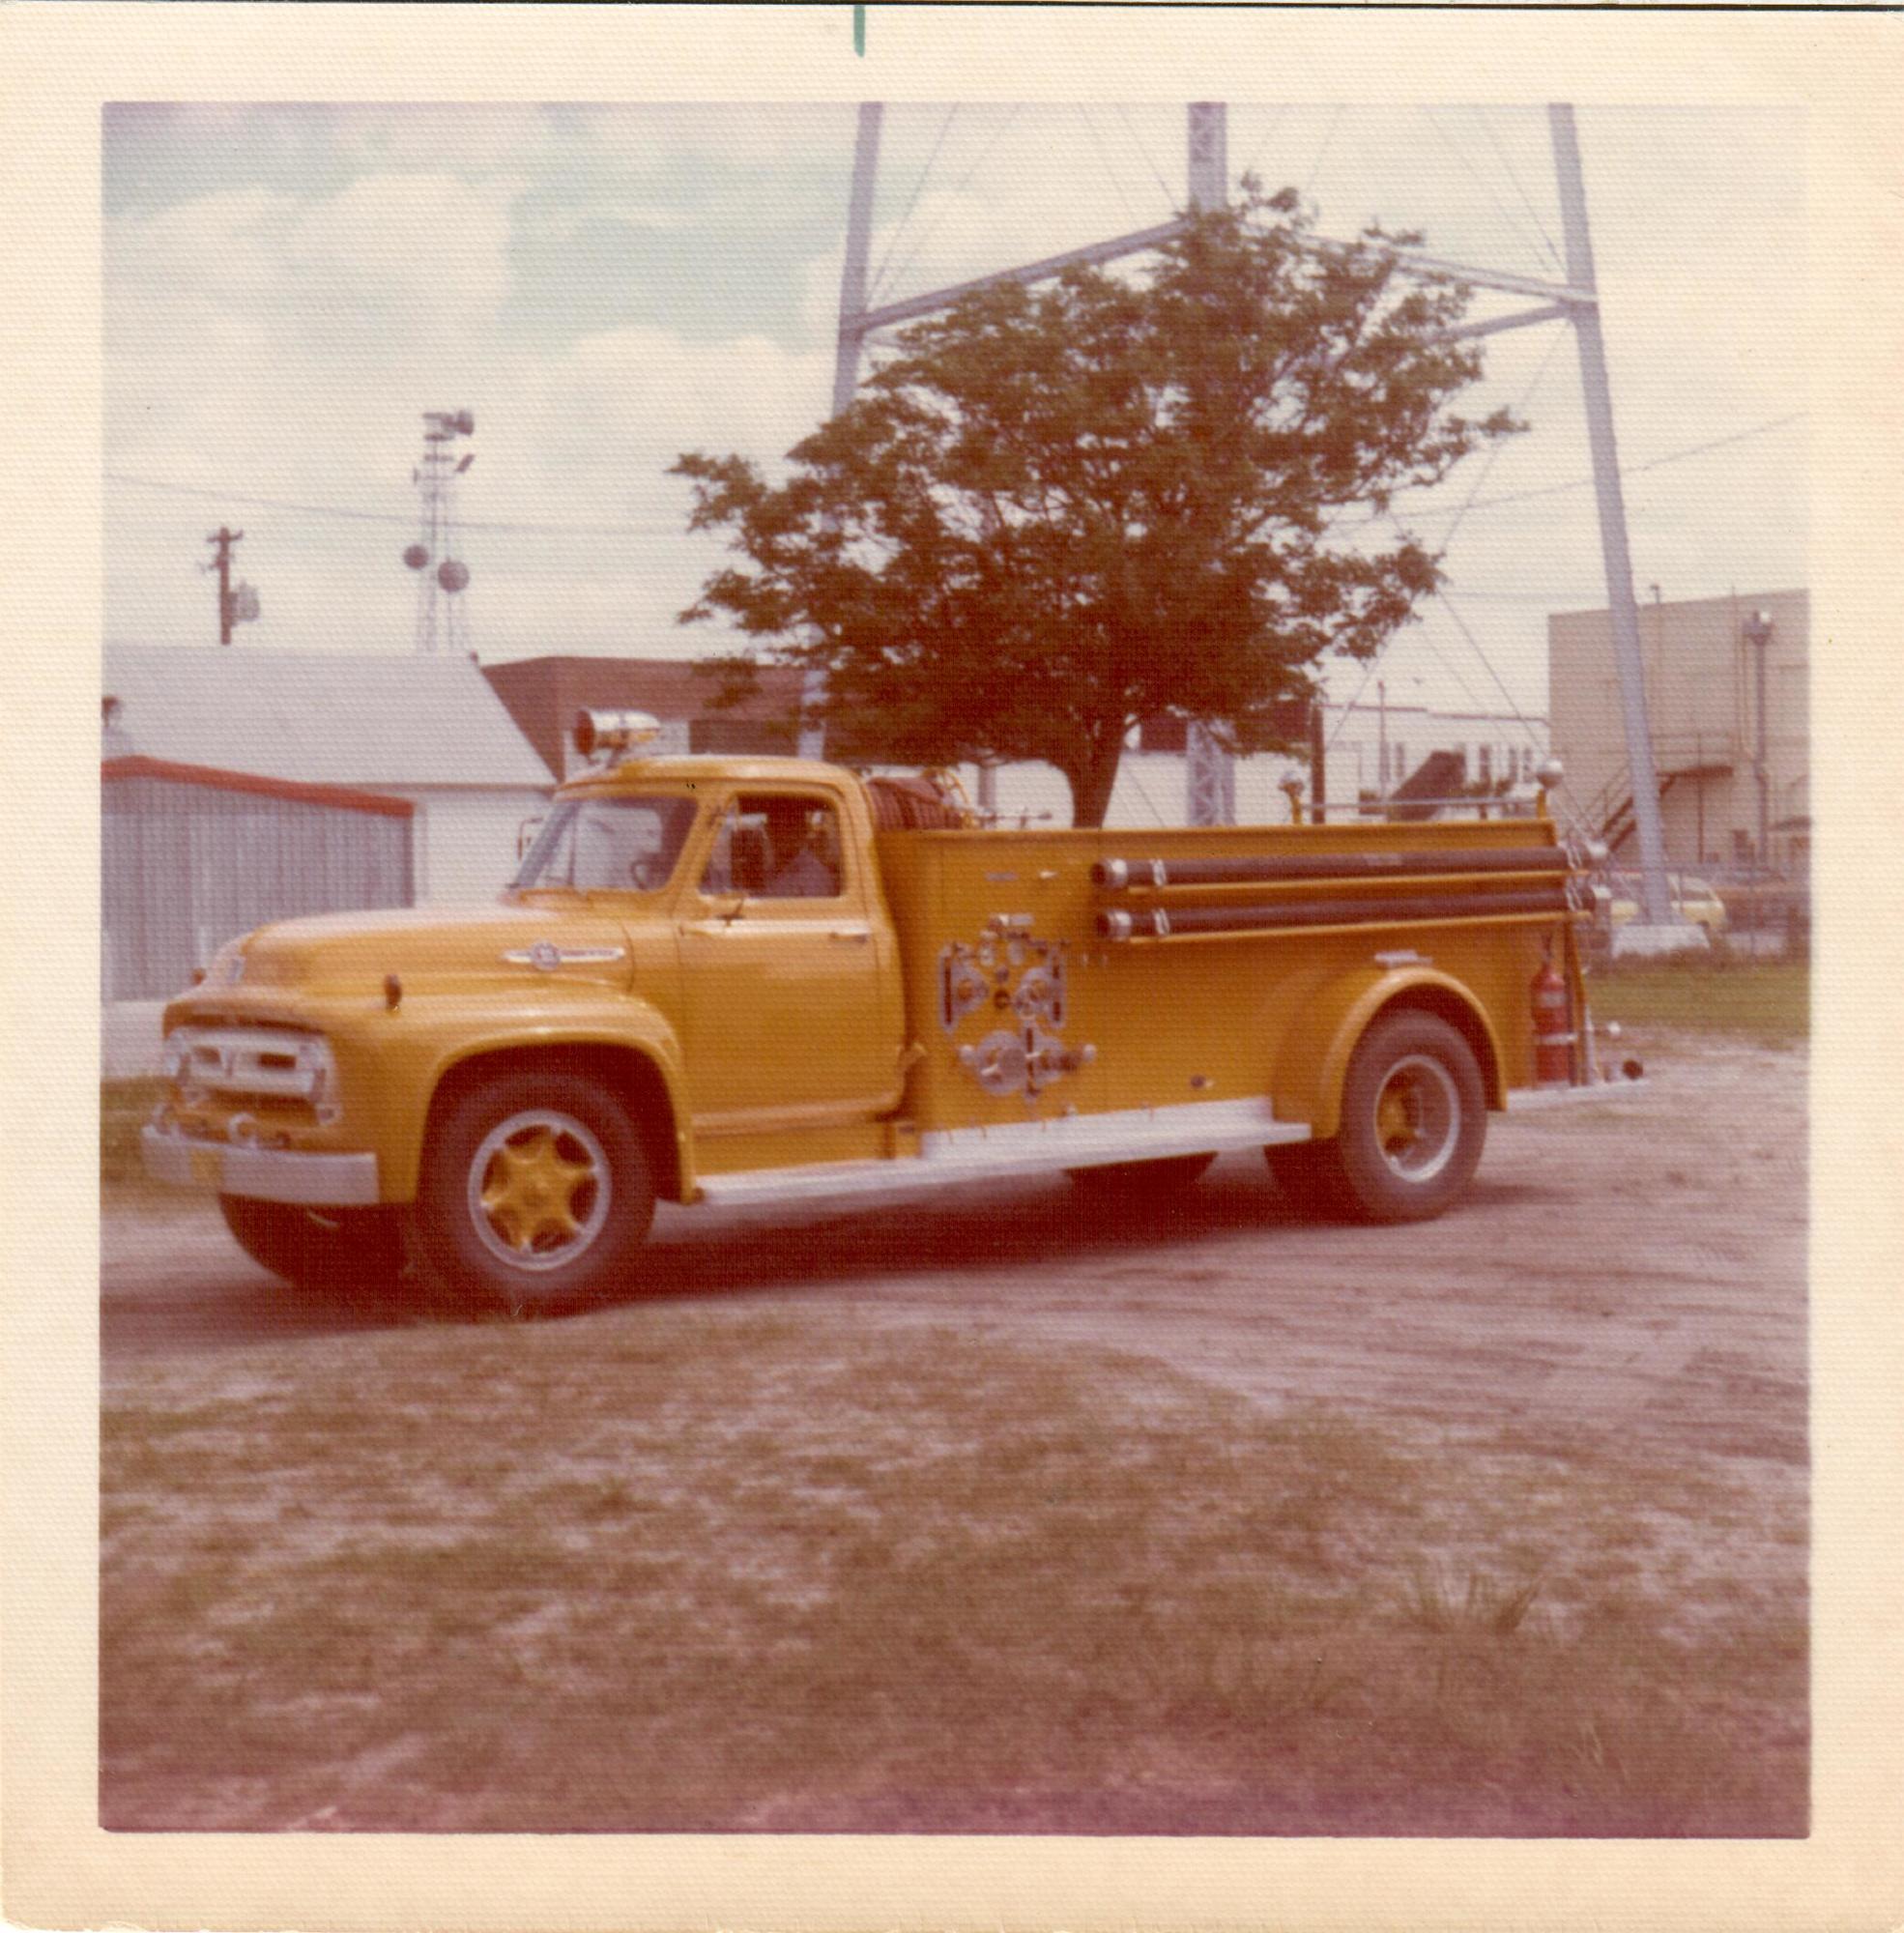 The American La France fire engine originally was red but later received a bright yellow coat of paint.